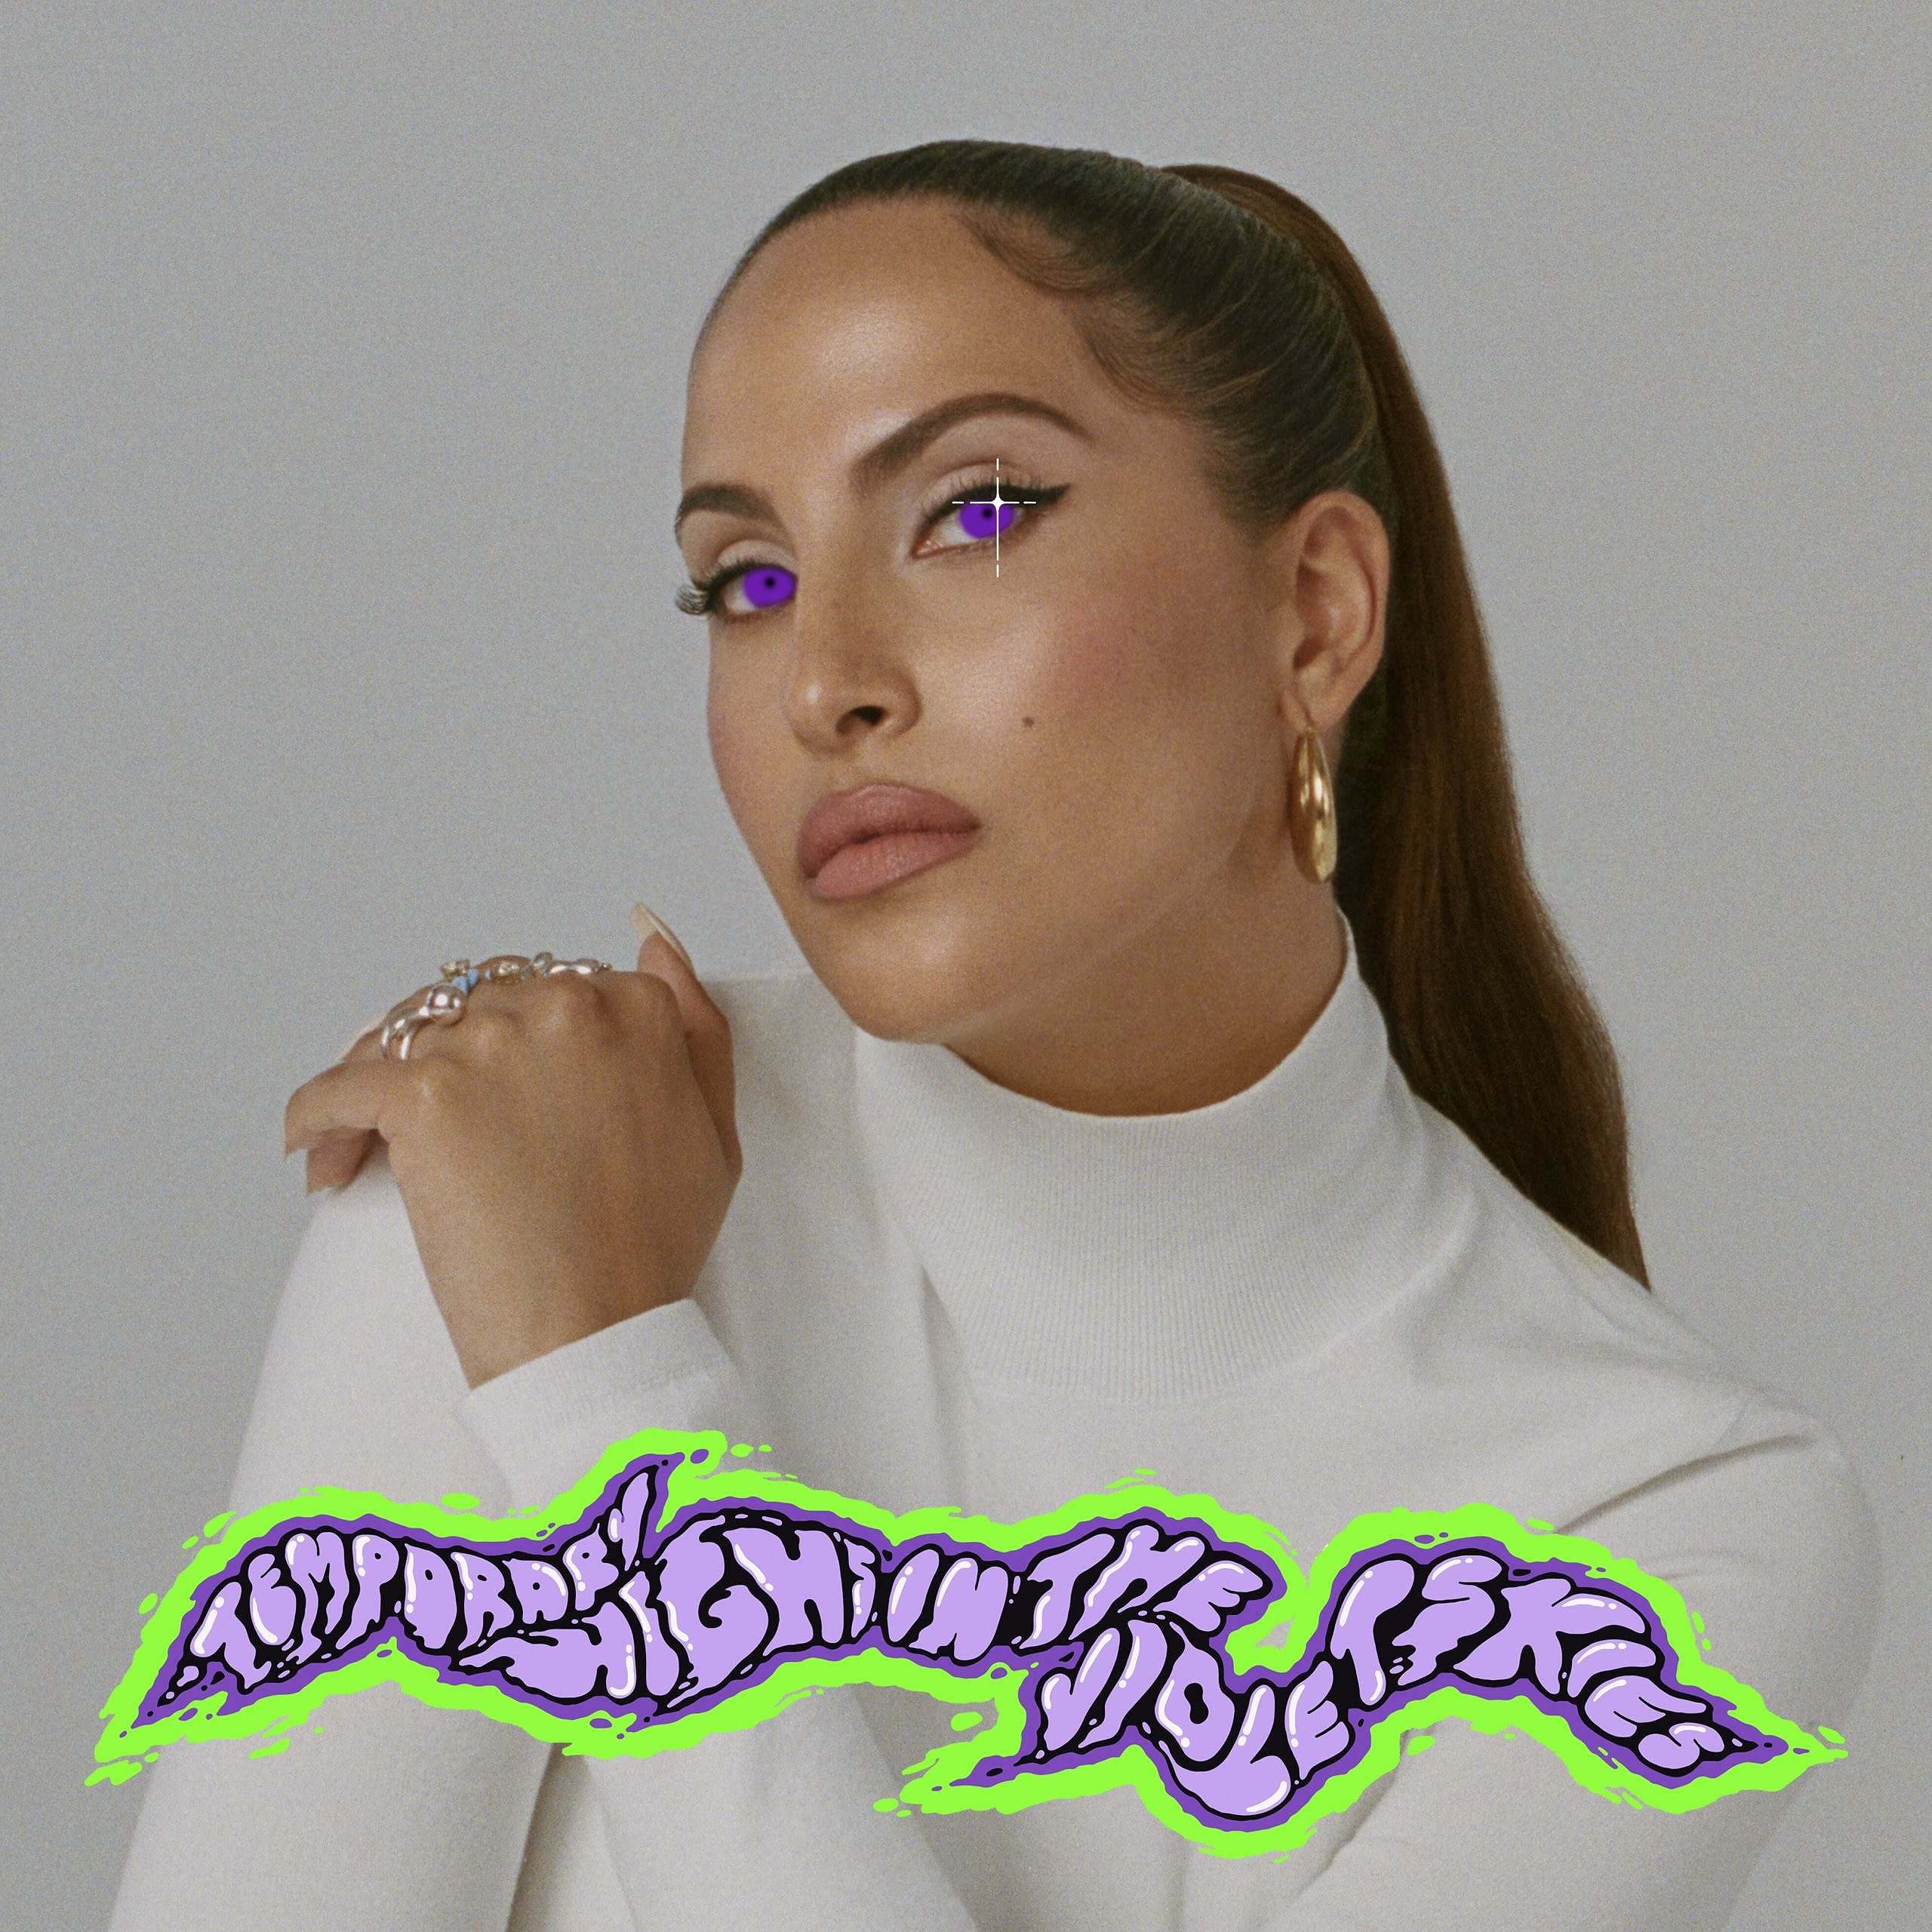 Peep The Artwork & Tracklisting For Snoh Aalegra’s Upcoming Album ‘Temporary Highs In The Violet Skies’